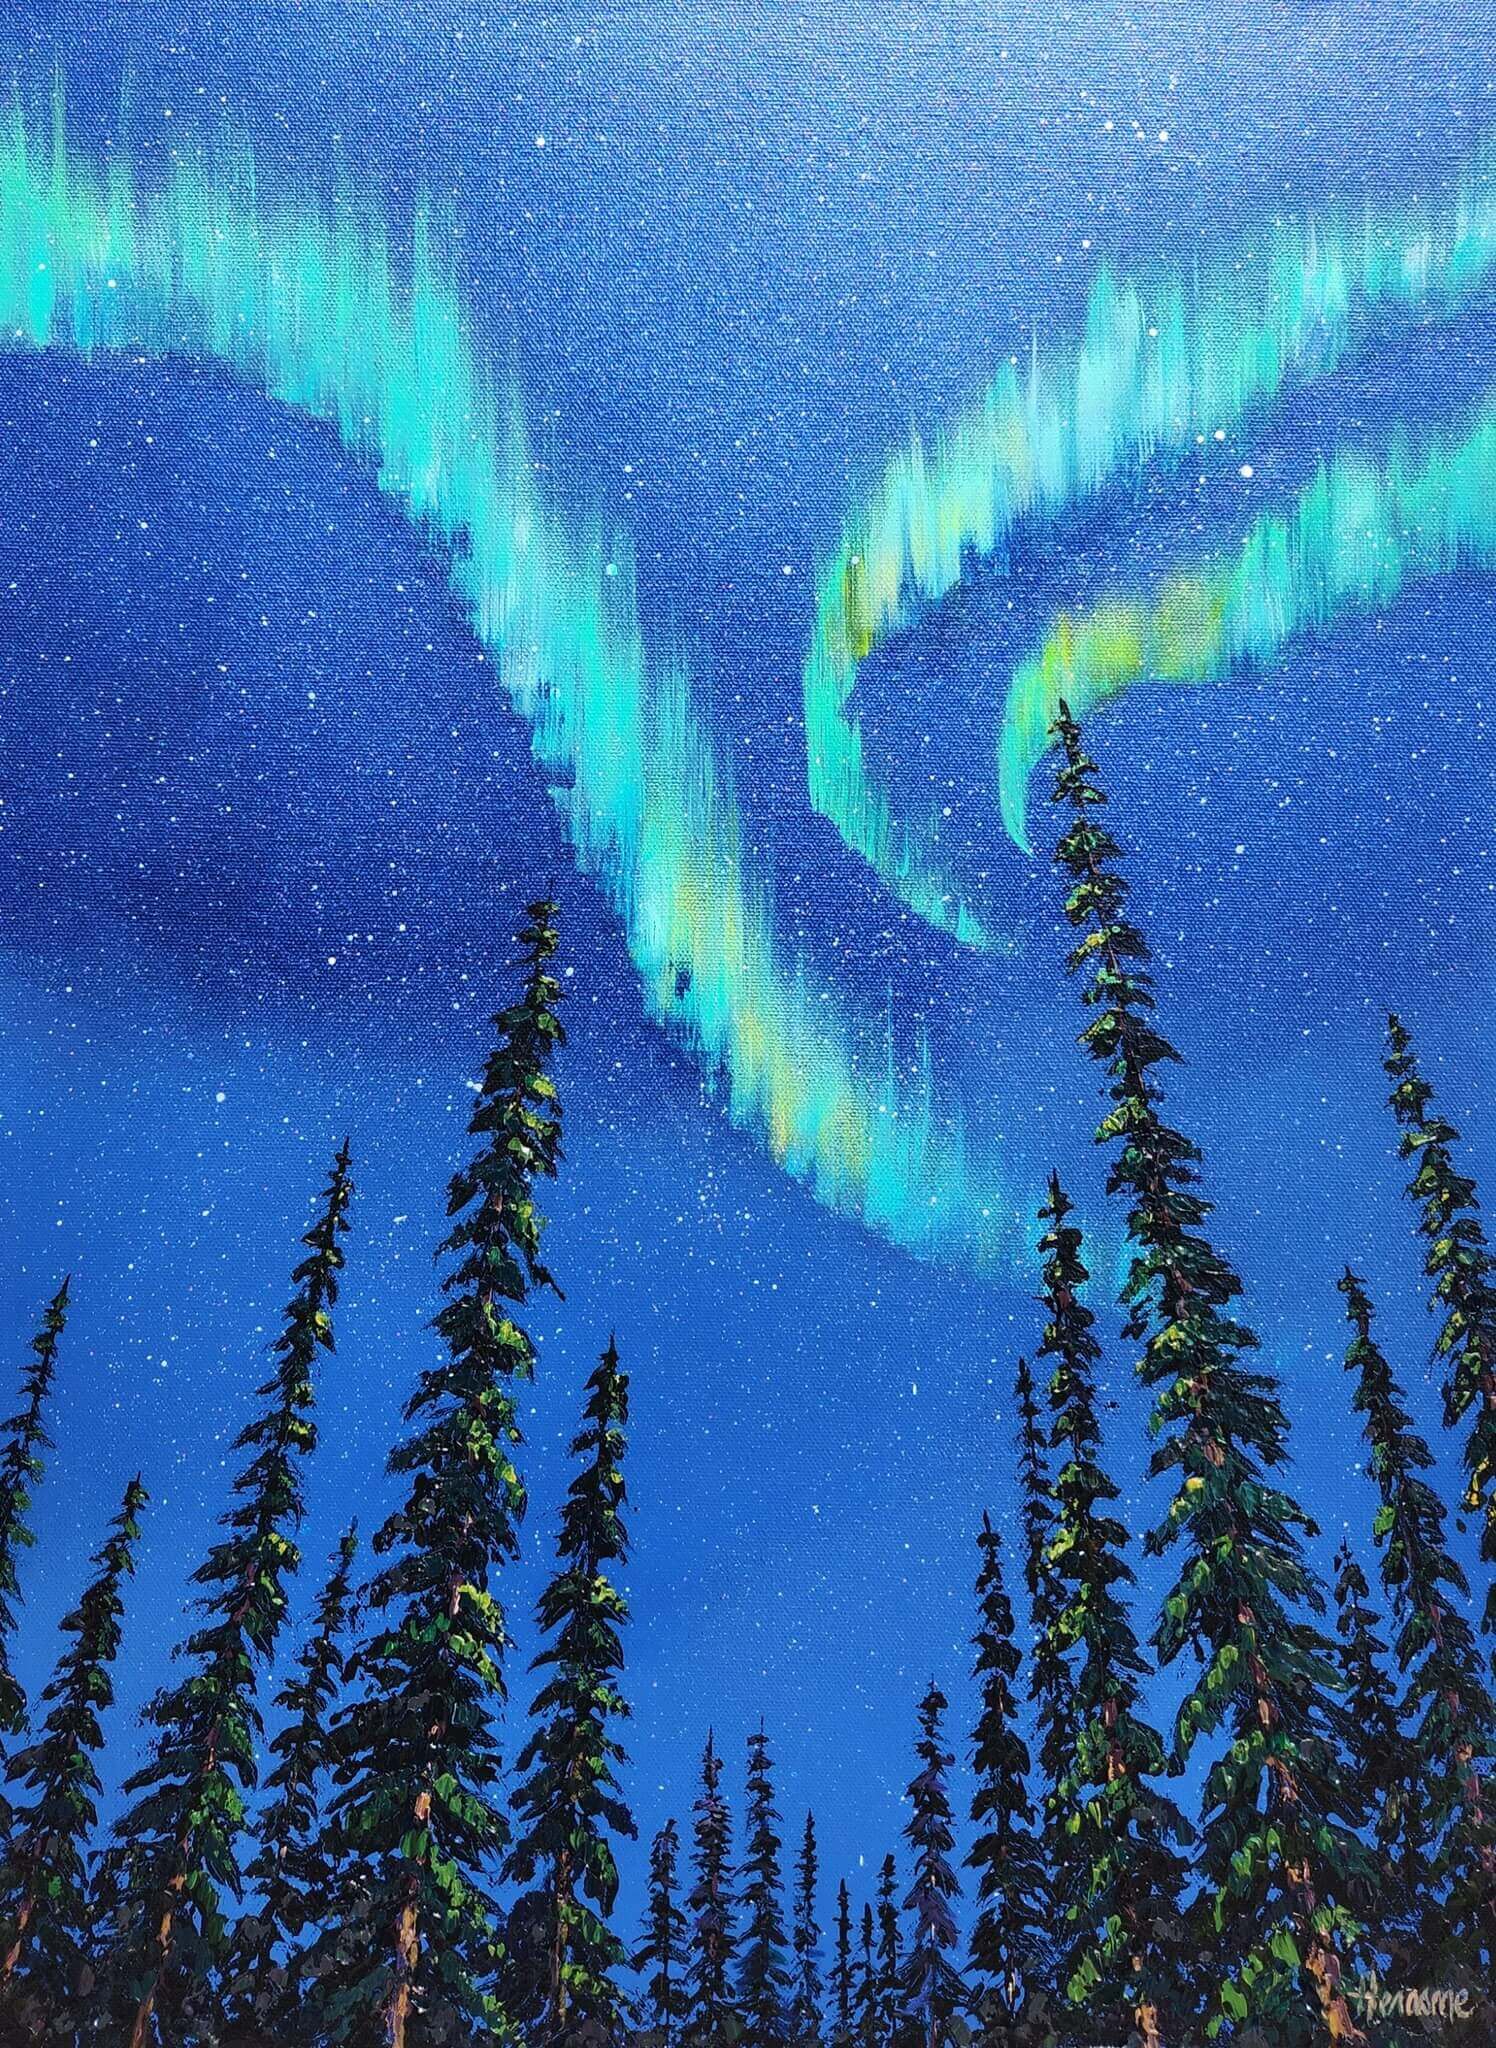 Acrylic Painting showing the starry sky